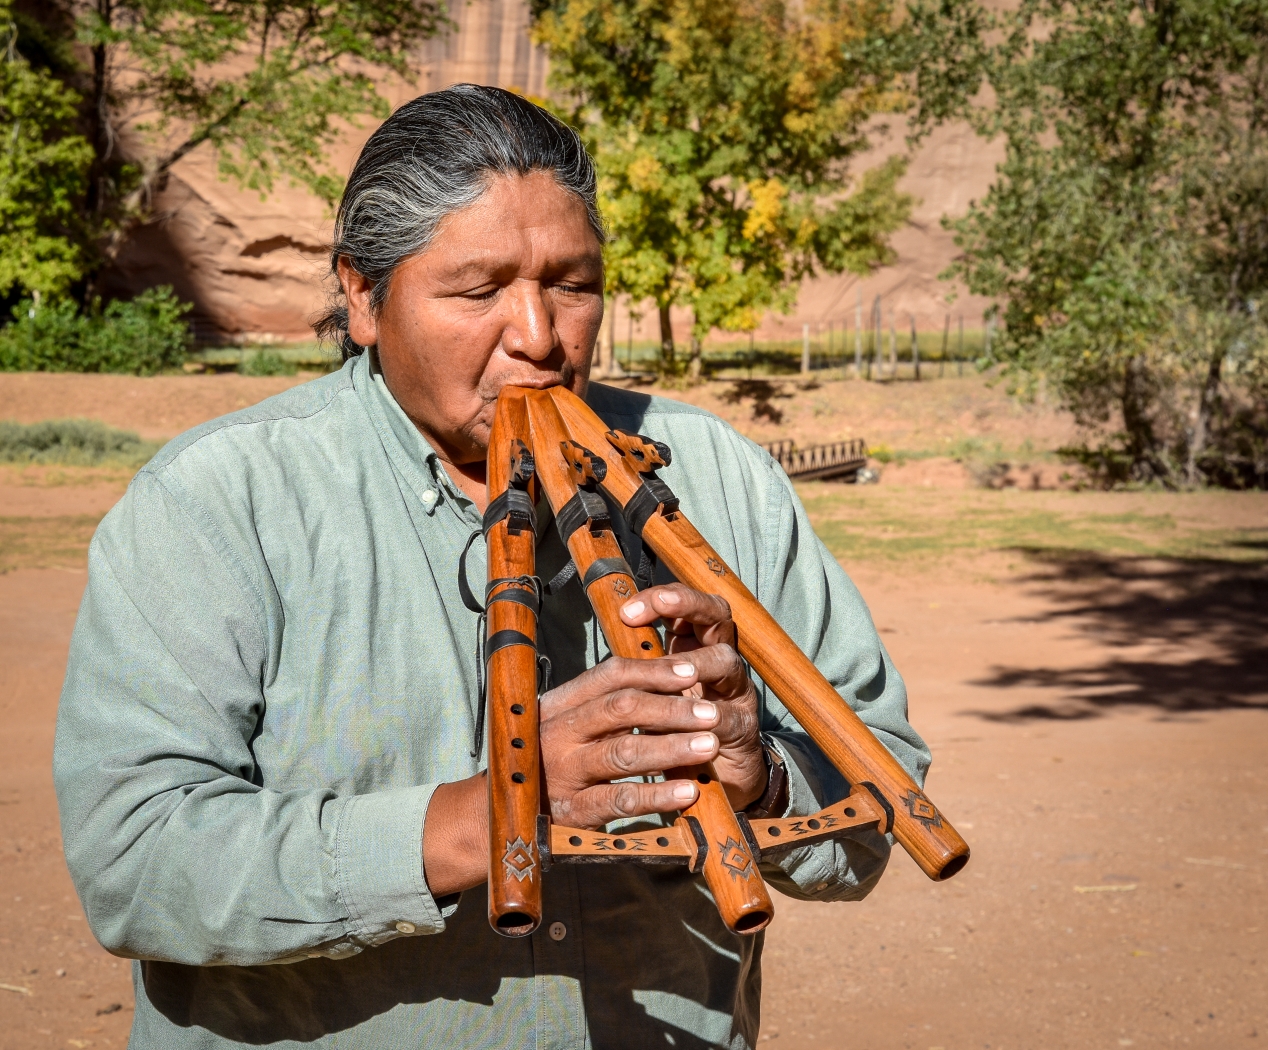 Travis Terry - Songs of Canyon de Chelly by Susan Case